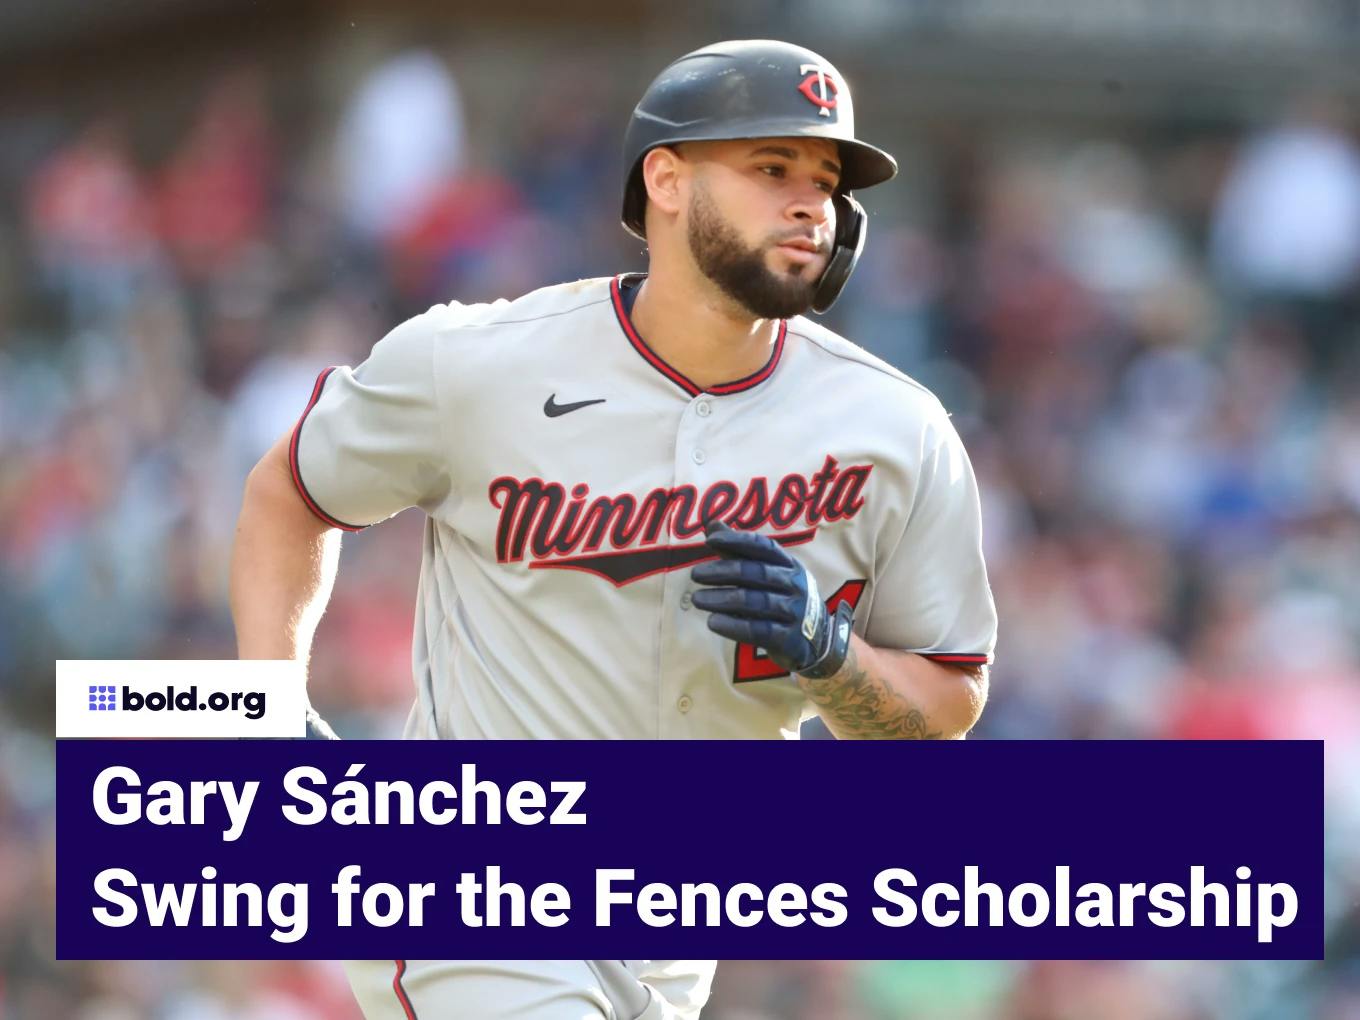 Gary Sánchez Swing for the Fences Scholarship